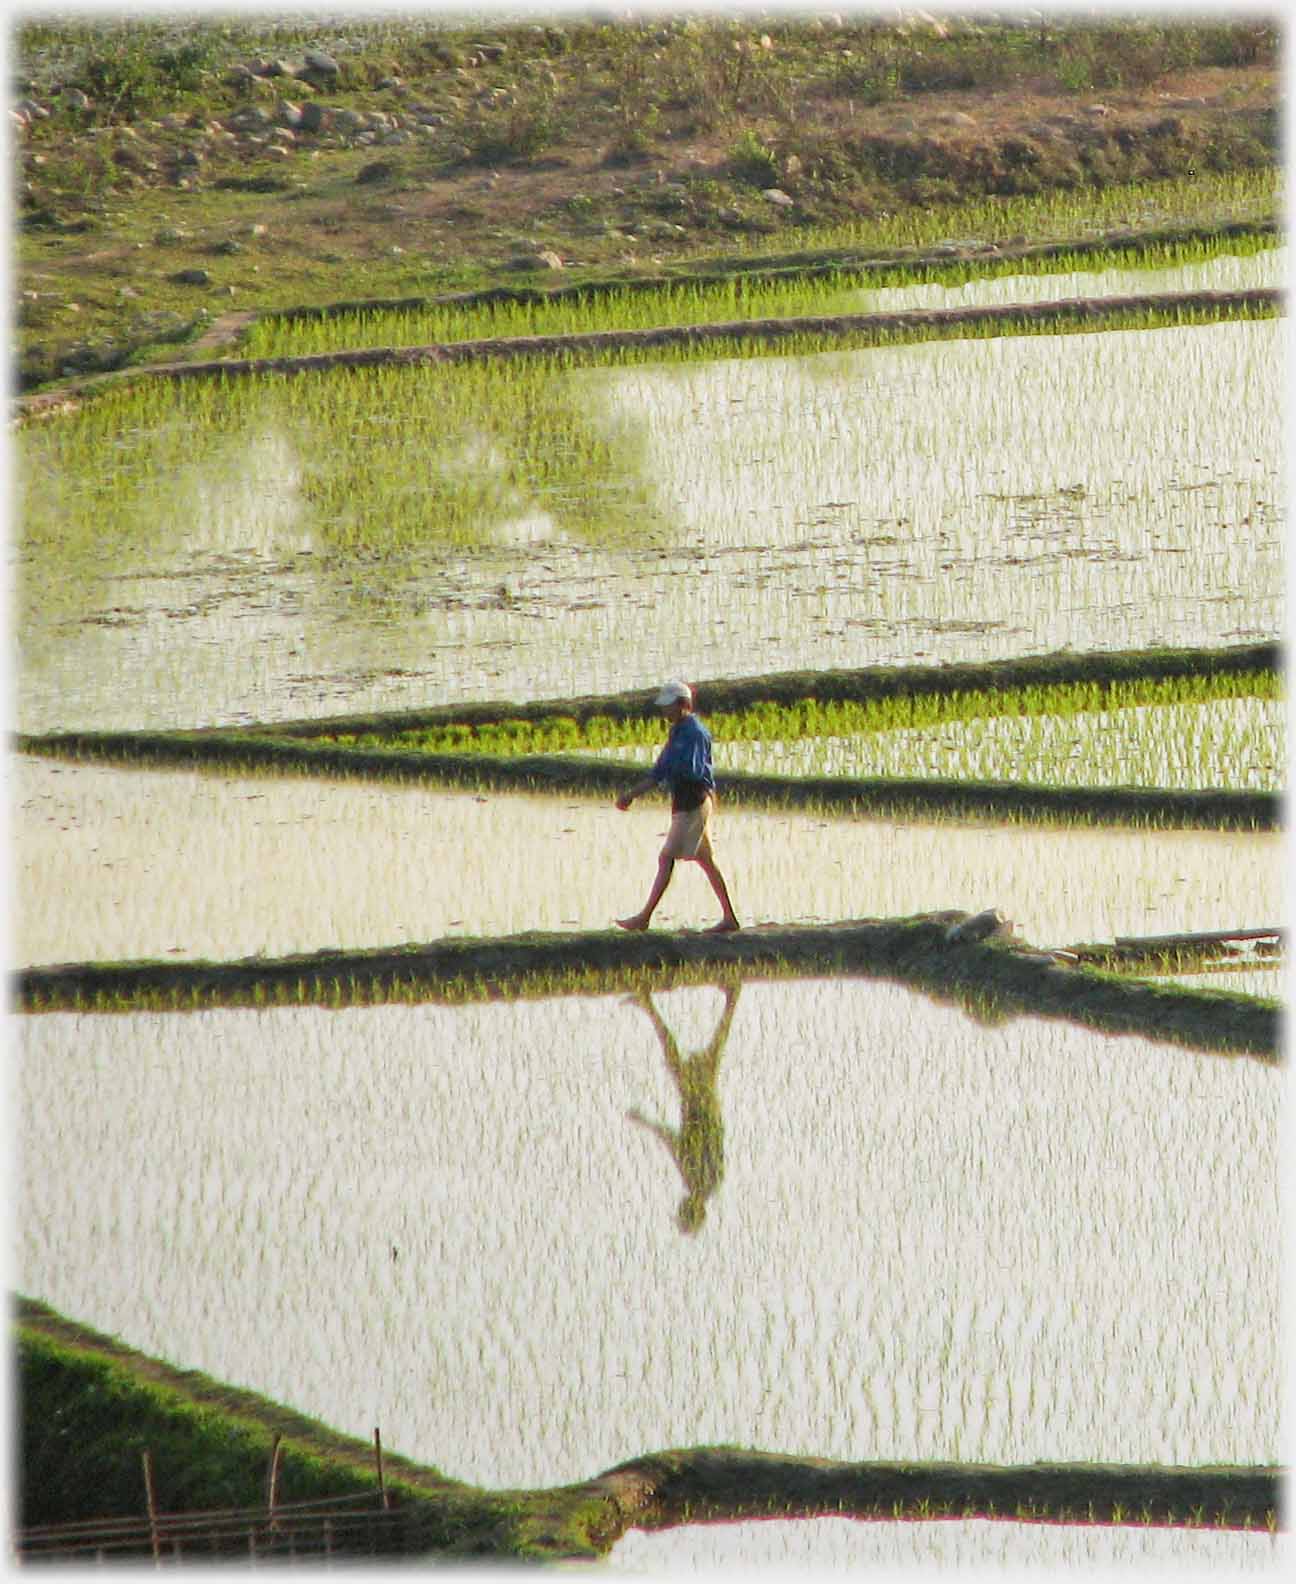 Closer view of man striding with reflection.